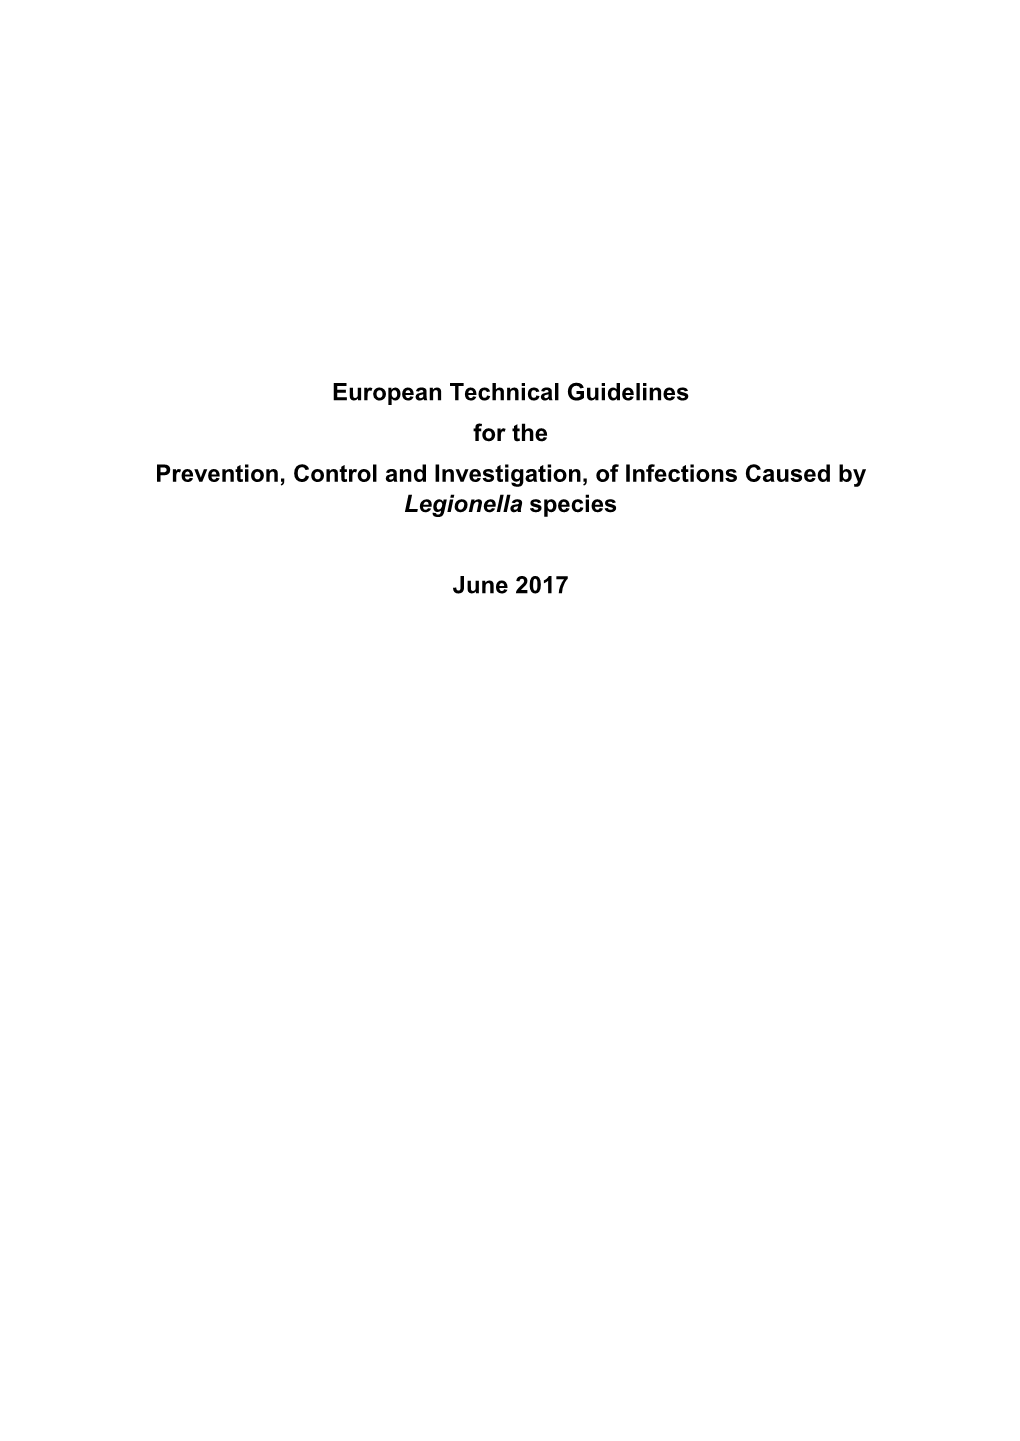 European Technical Guidelines for the Prevention, Control and Investigation, of Infections Caused by Legionella Species June